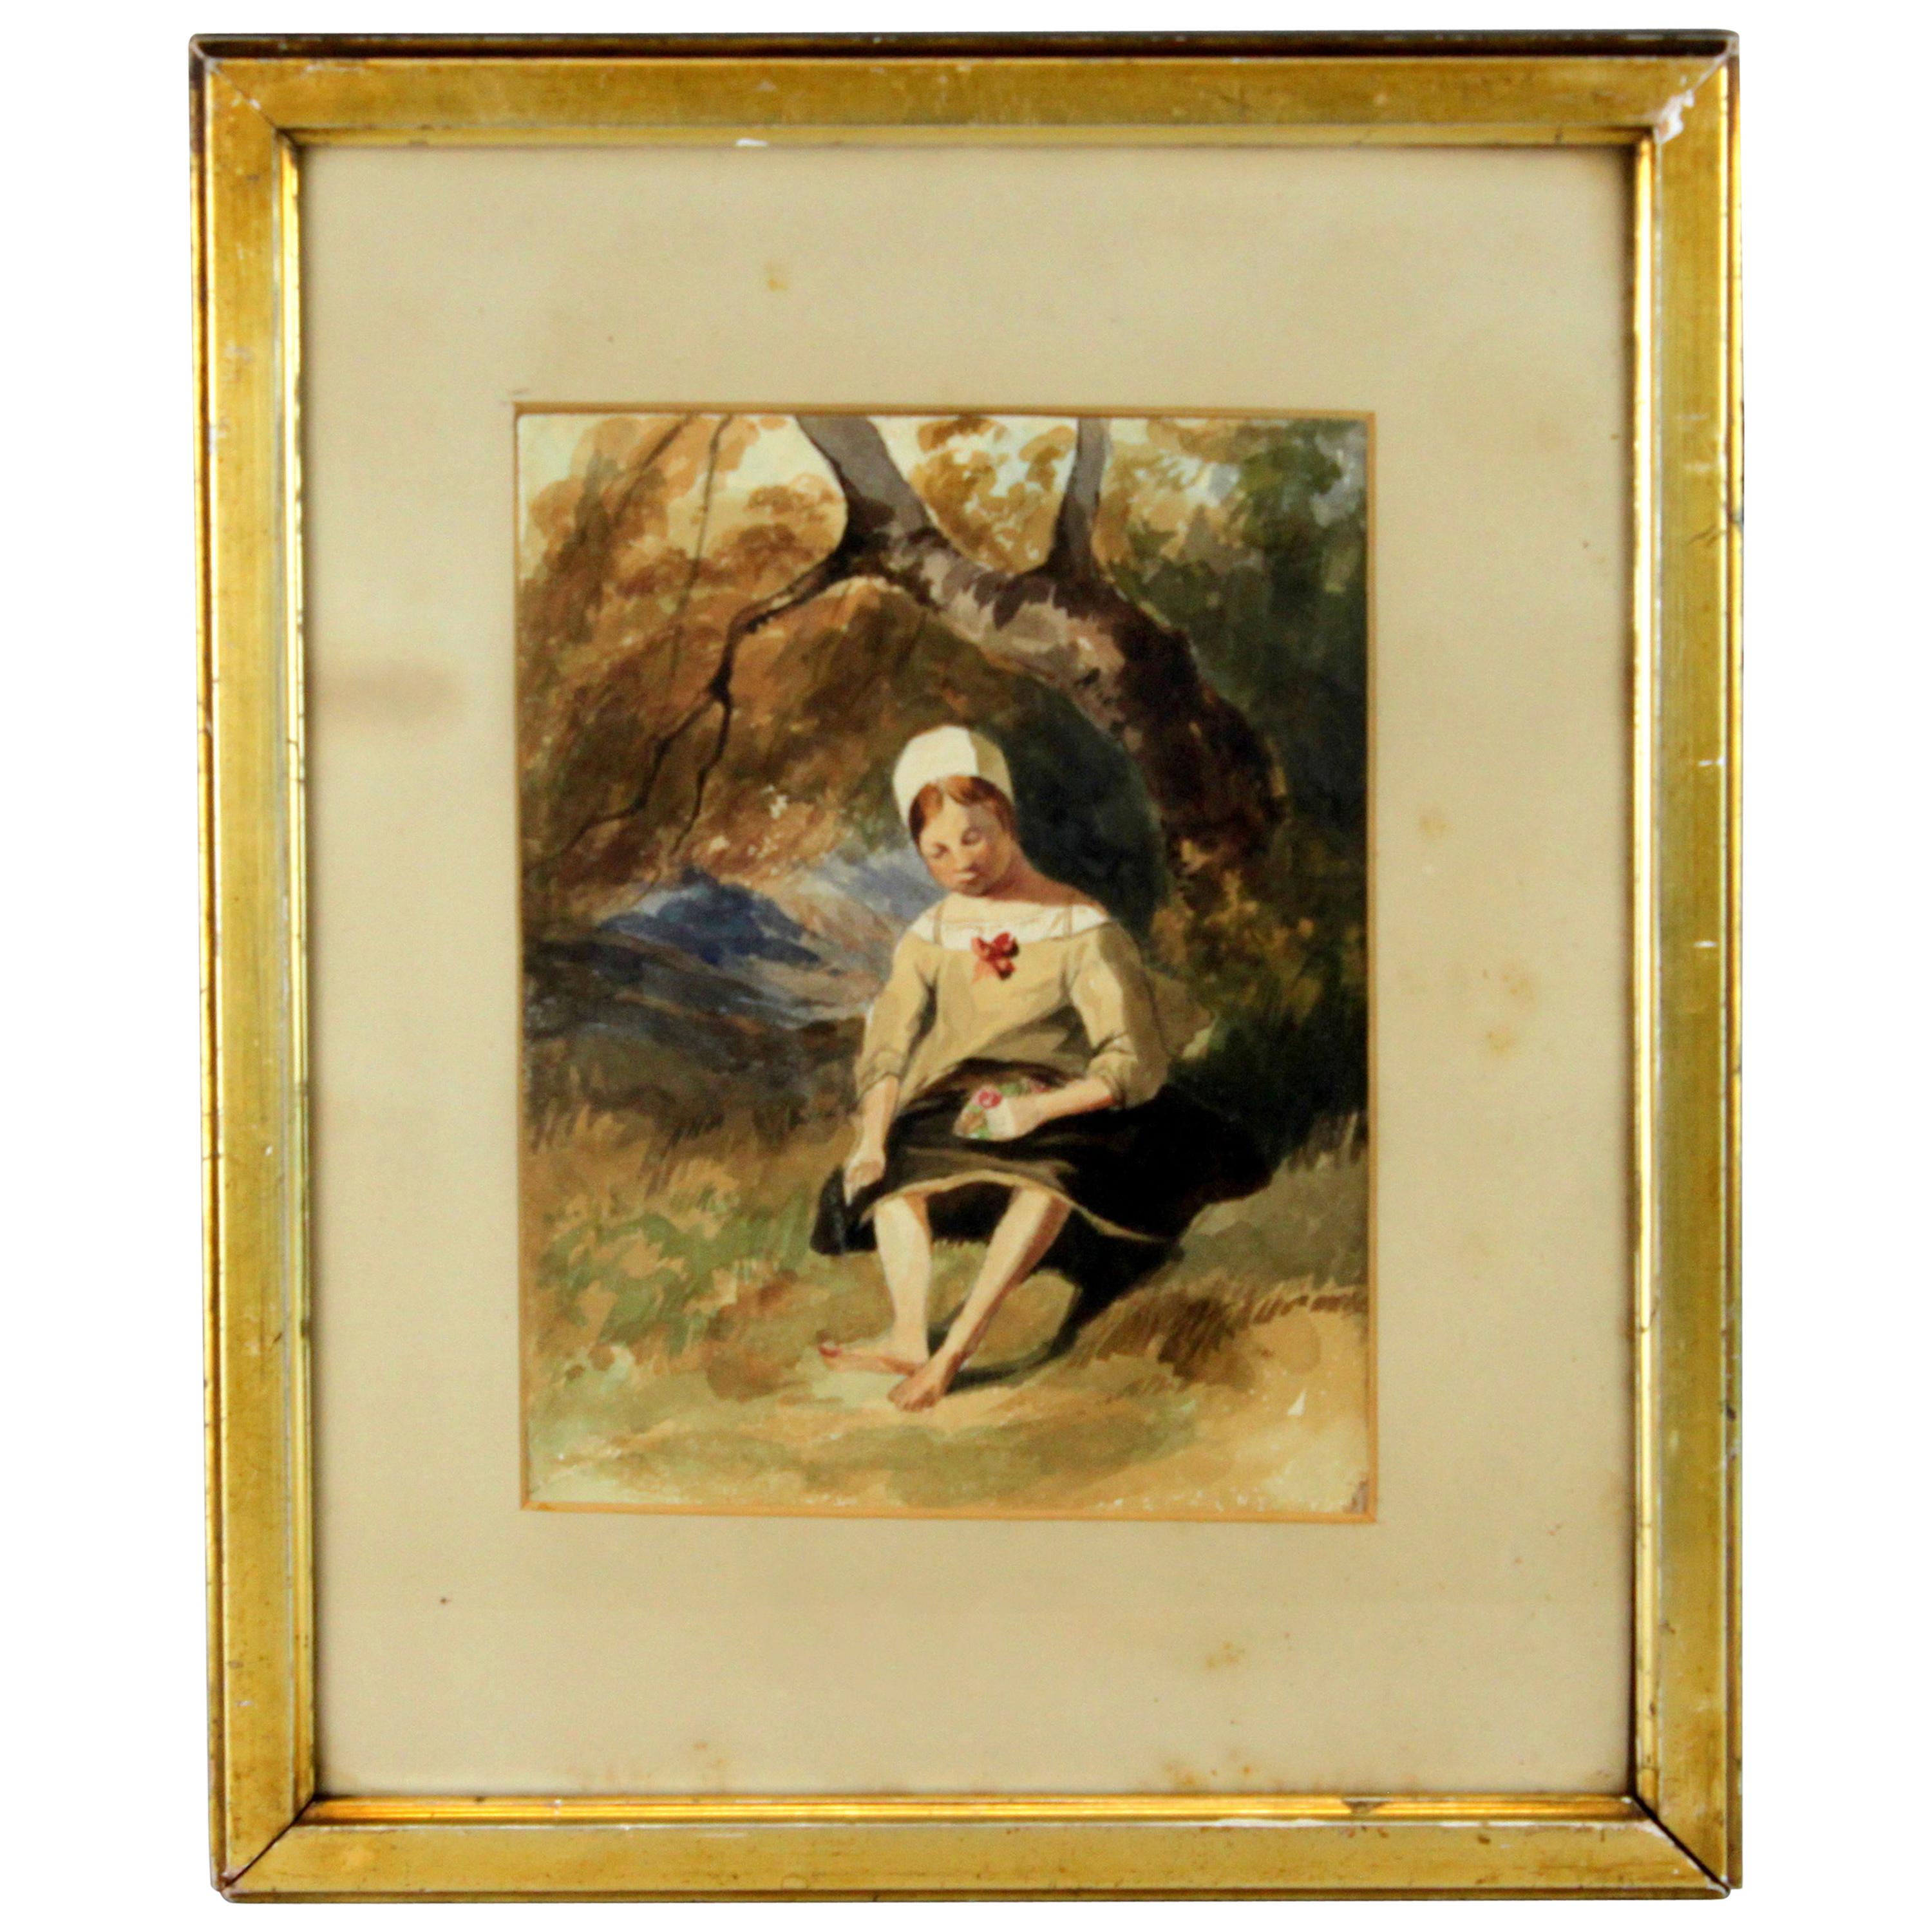 Antique Watercolour Painting "Girl in Forest", circa 1850s